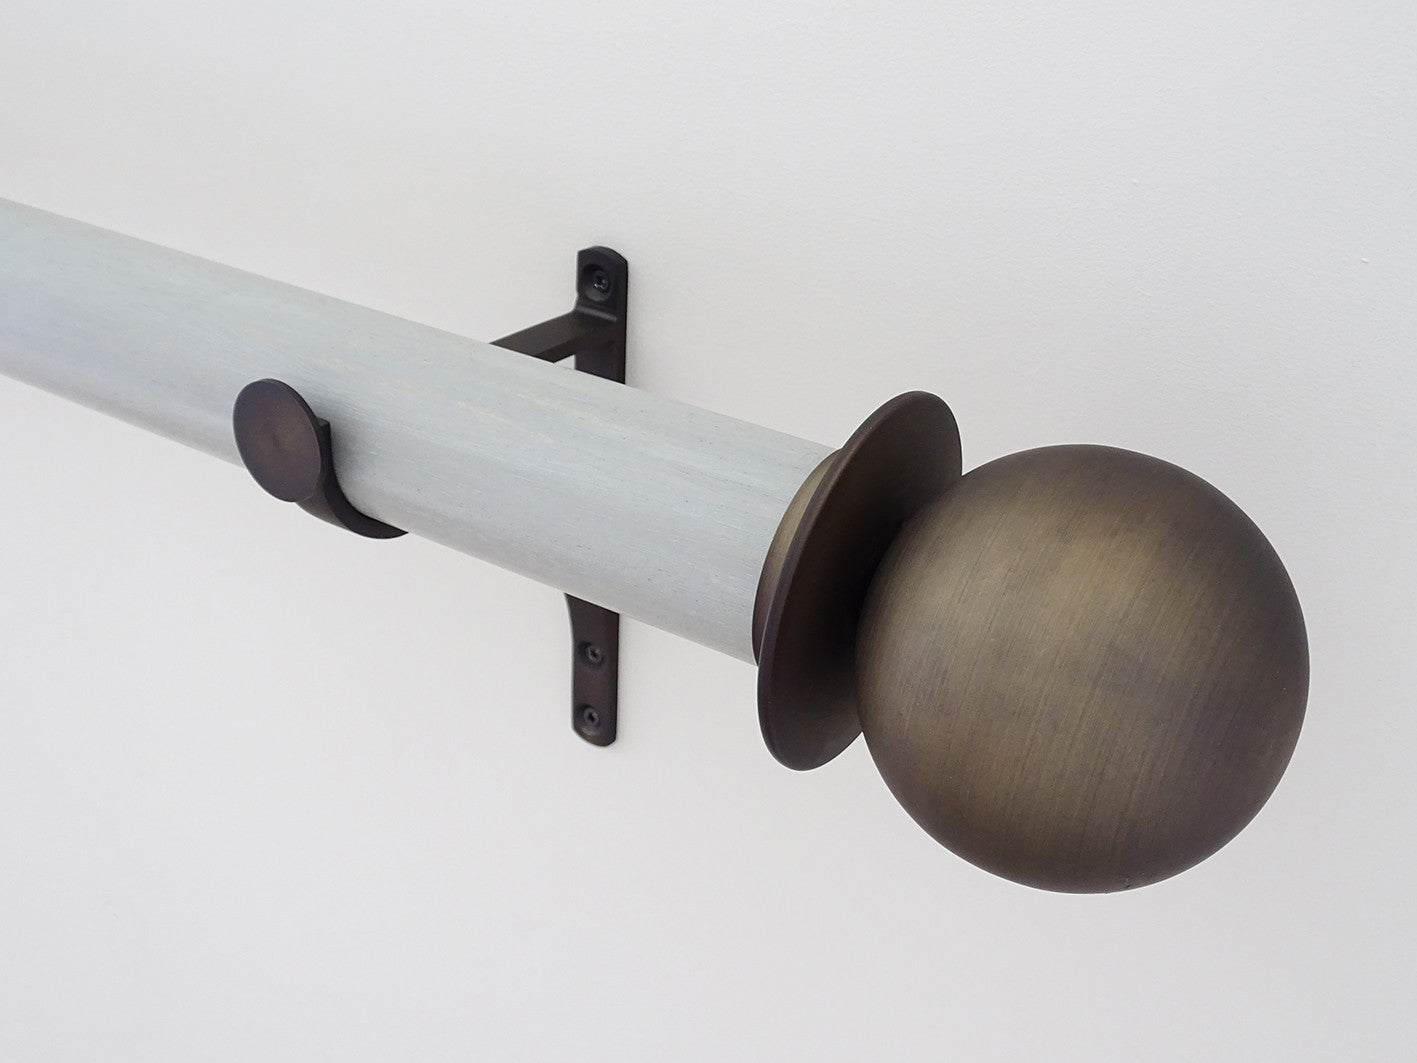 Metal ball finial in brushed bronze, mounted on 50mm "wood pidgeon" stained wood pole set